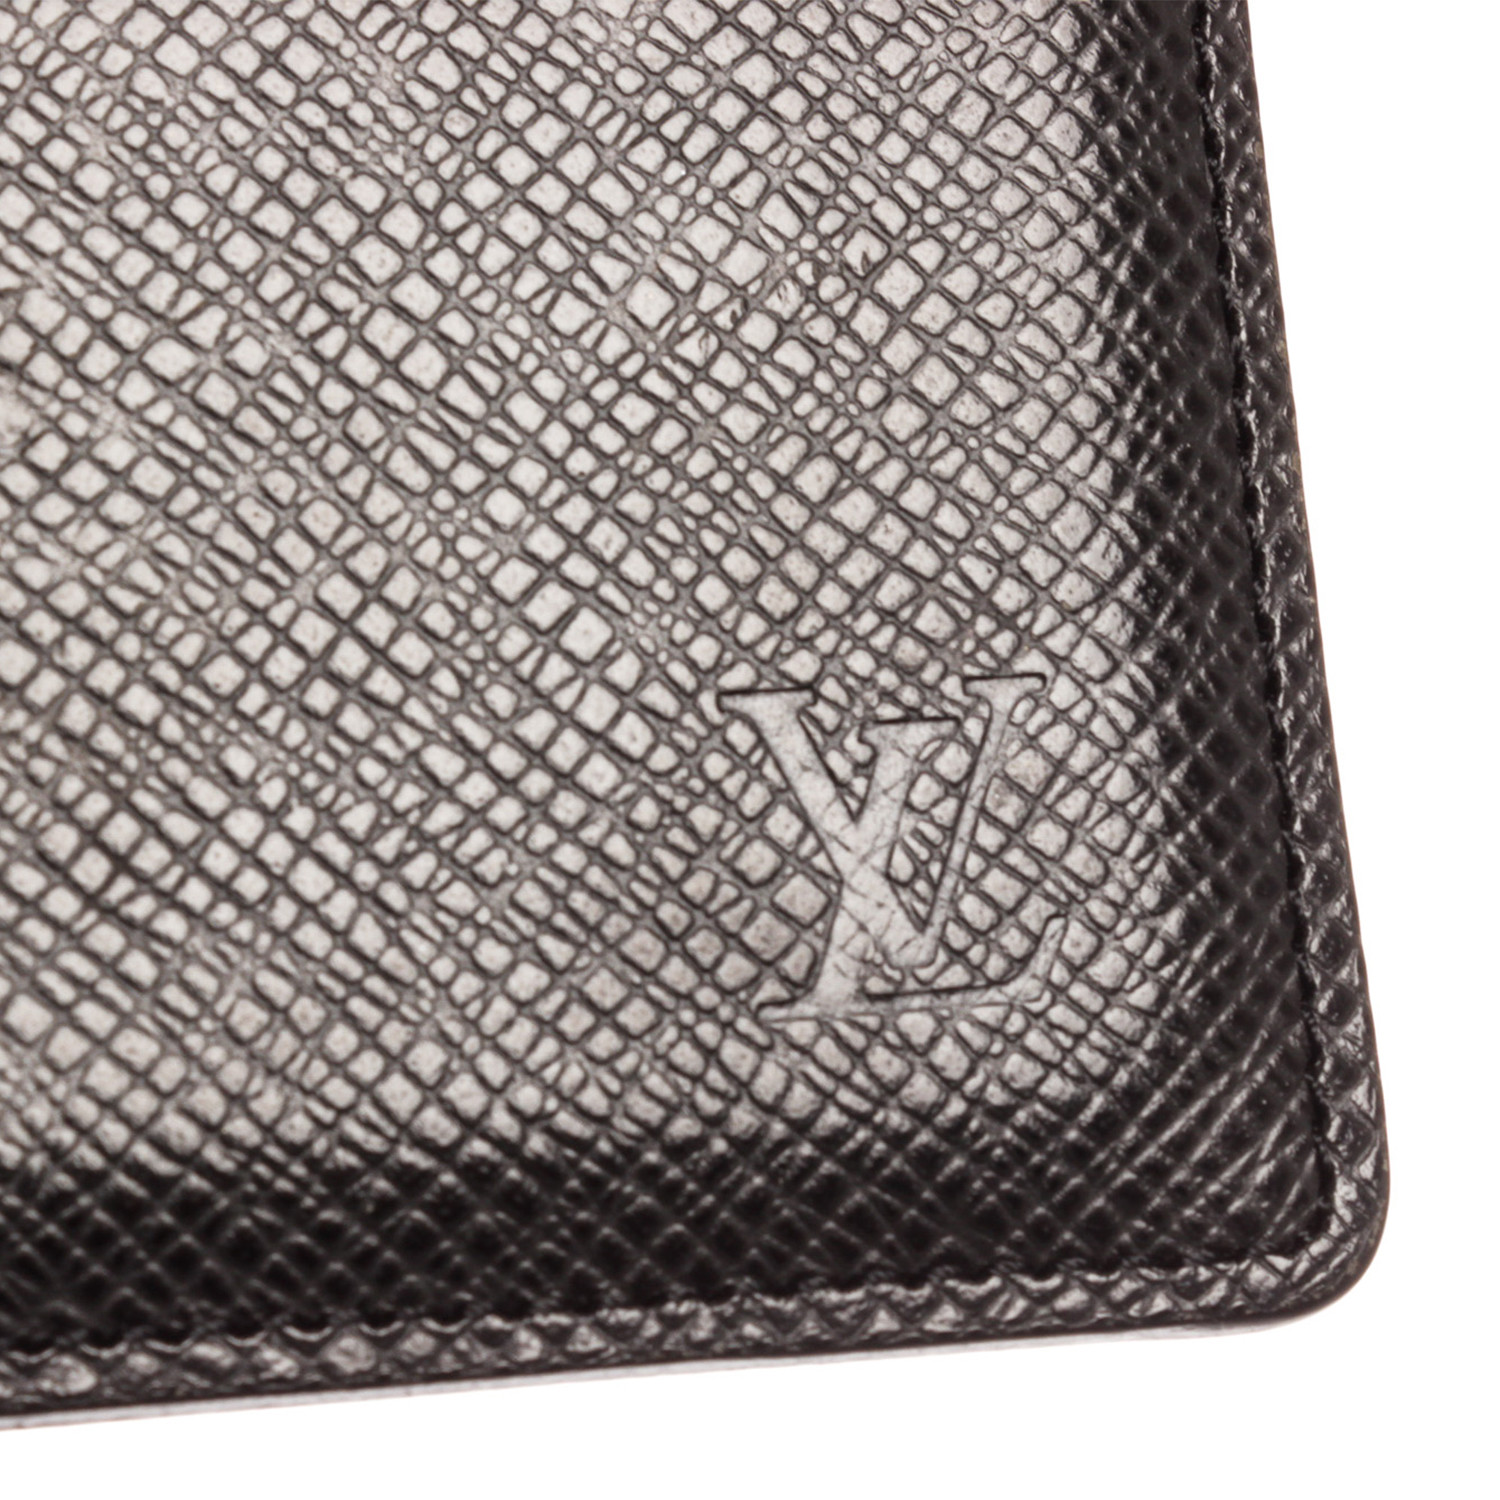 Louis Vuitton // 2004 Black Taiga Leather Card Holder Wallet // SP0044 // Pre-Owned - Vintage ...